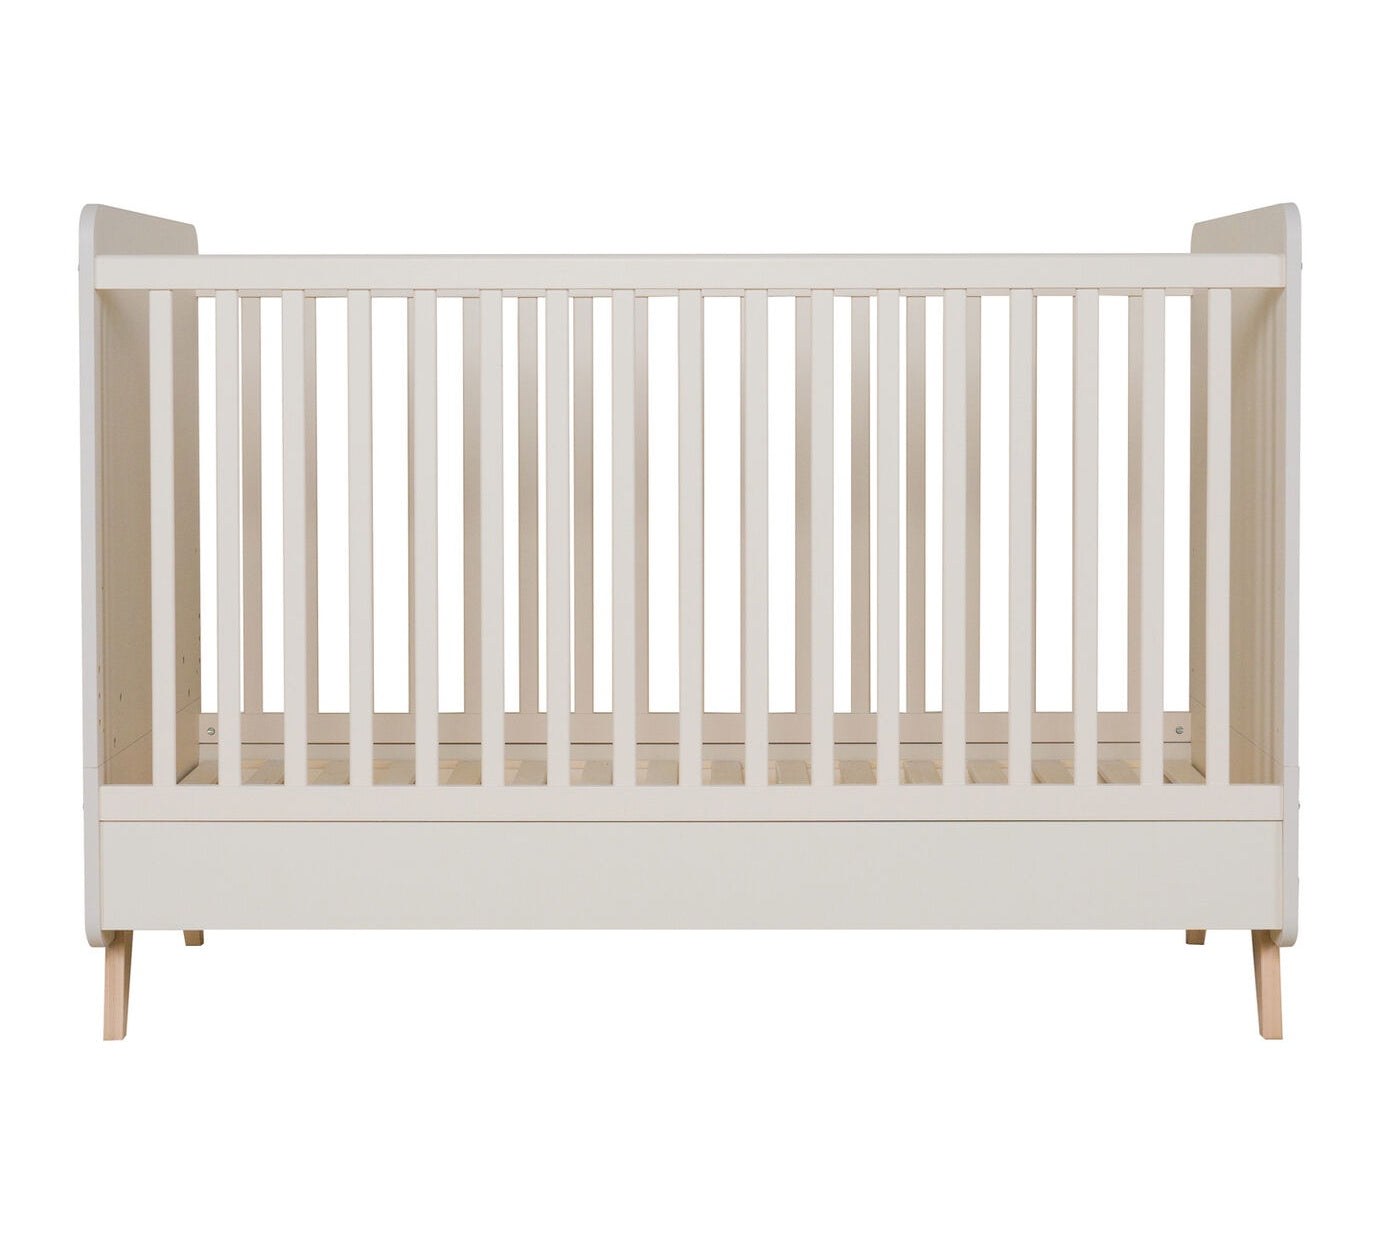 Deer Industries Baby Furniture Singapore, Convertible Cot to Bed, 70 x 140 Cot, Quax Loft series